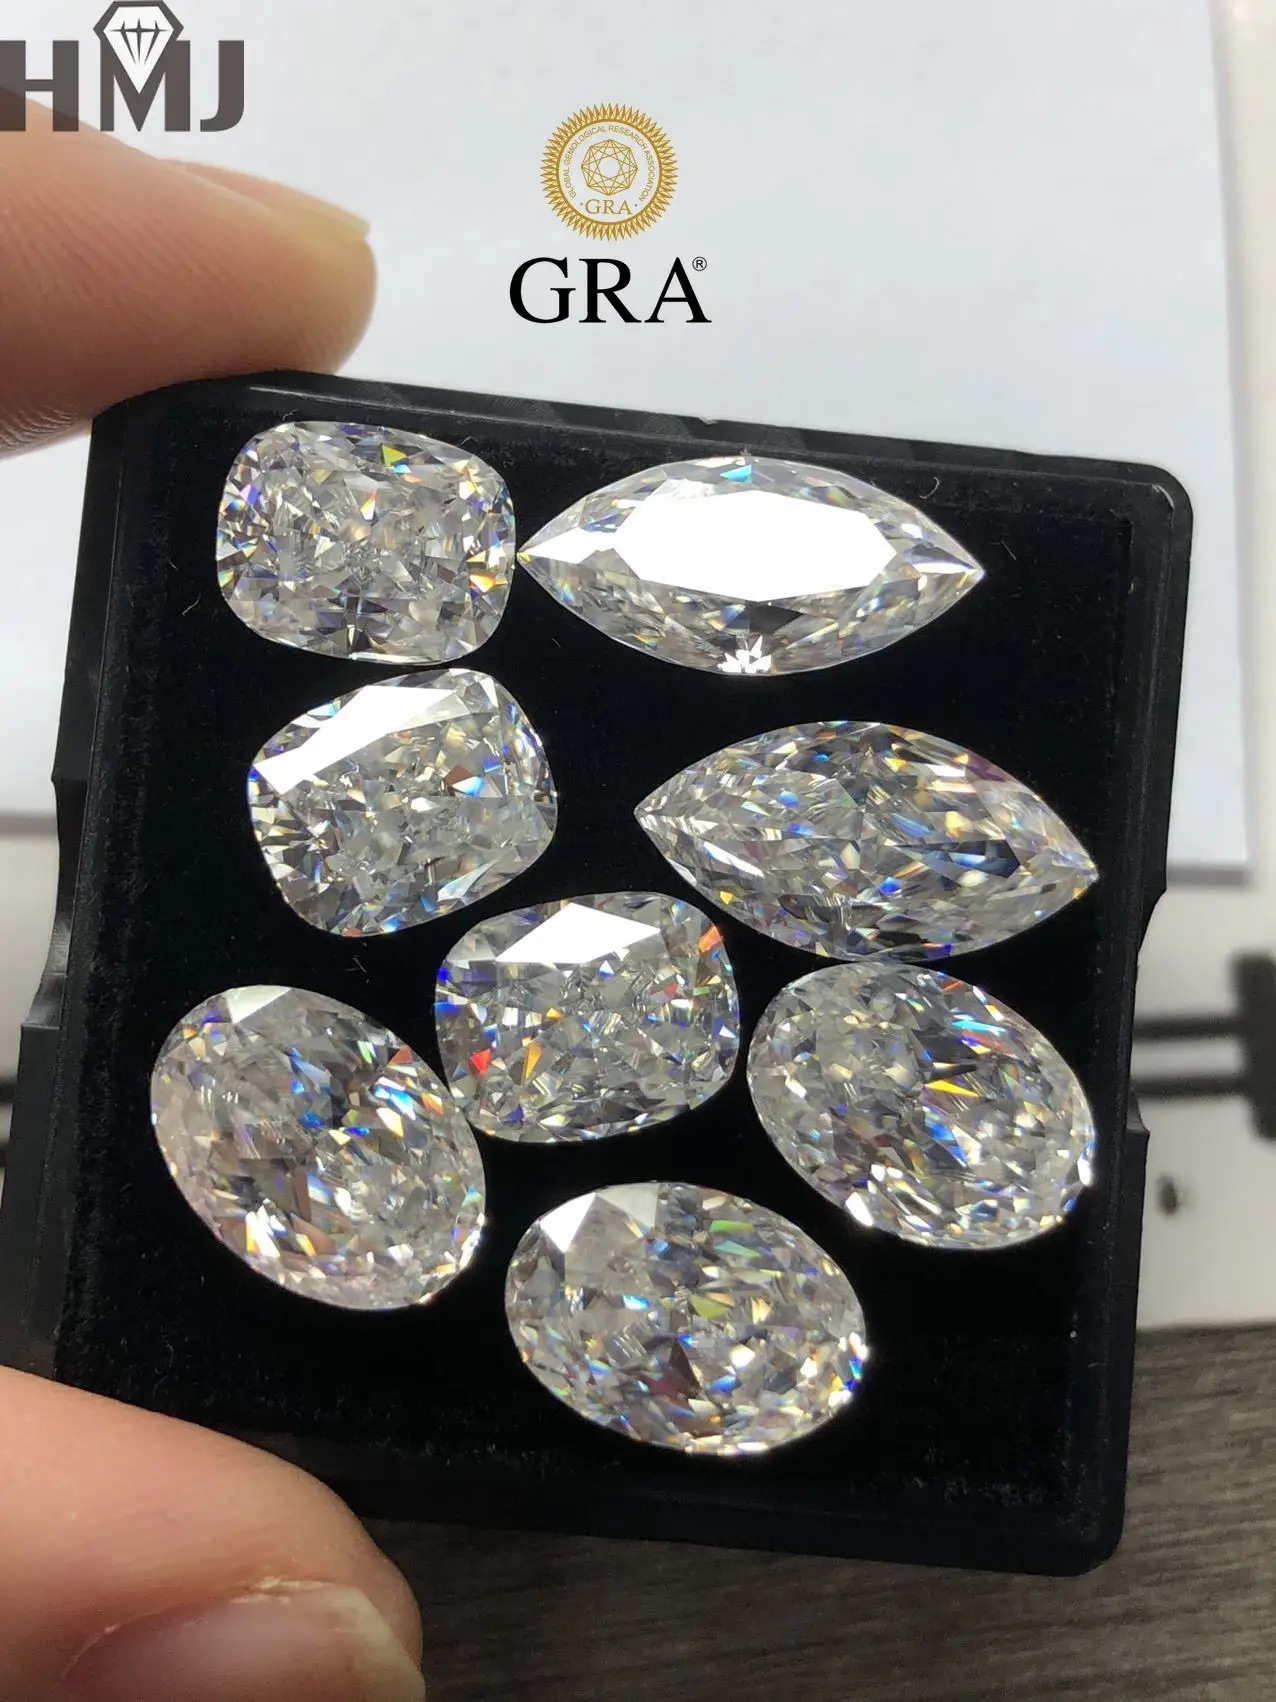 

HMJ Loose Moissanite Diamond Stone Crushed ice Oval Cut D Color Gemstones for Rings Necklace Jewelry Making GRA Certificate